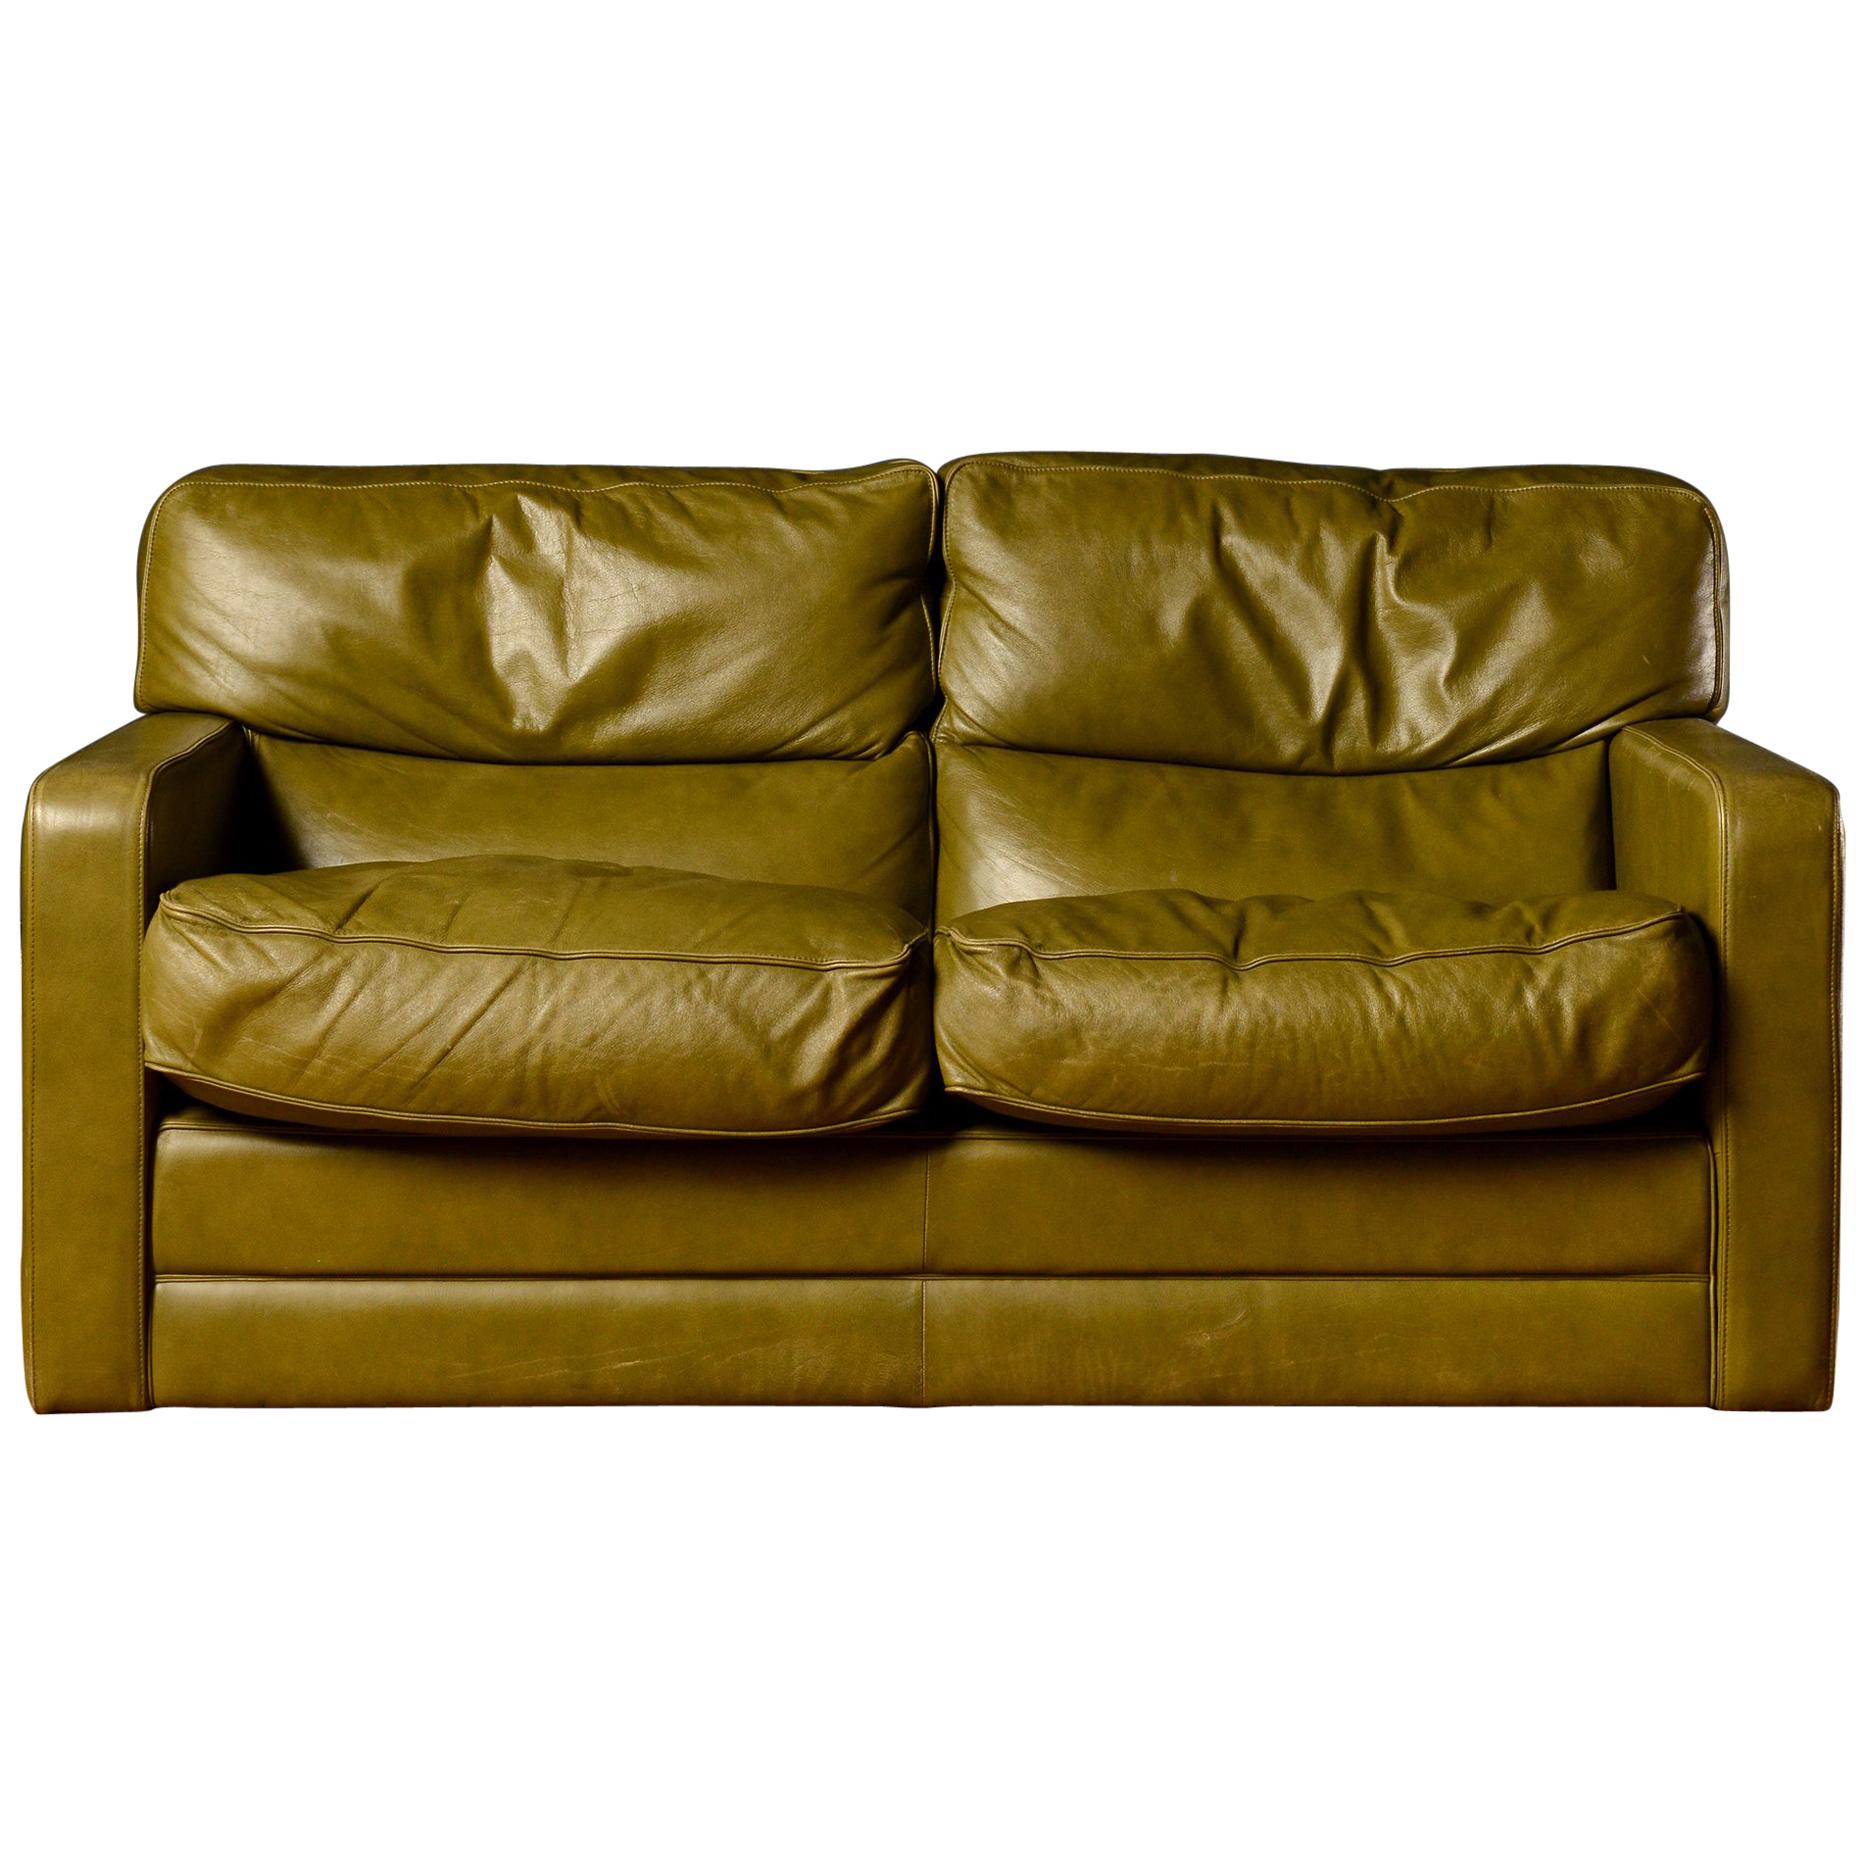 Midcentury Poltrona Frau Two-Seat in Green Leather